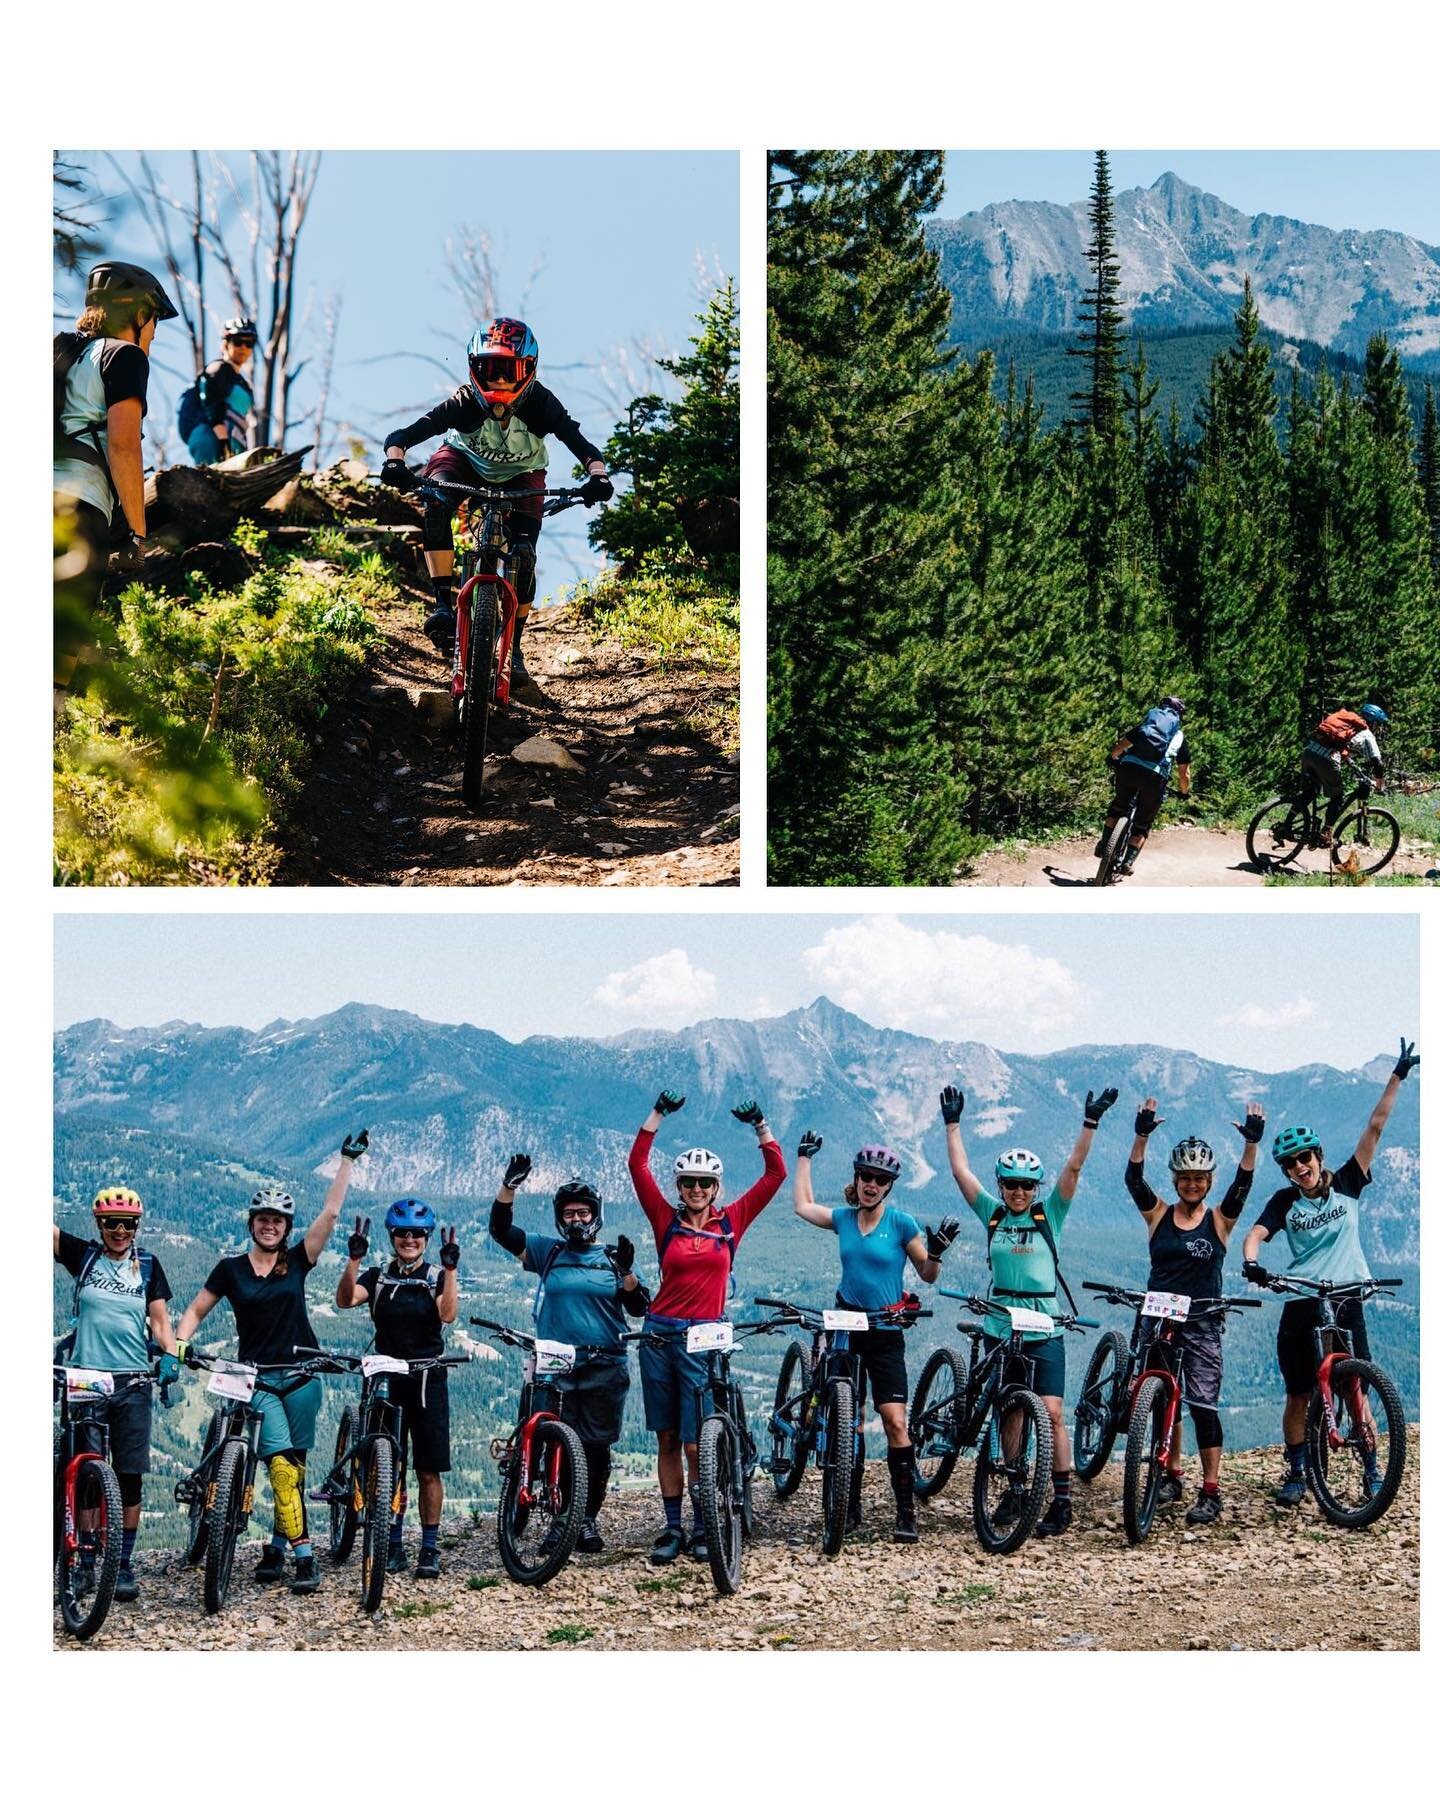 🌟 We&rsquo;re going back to Big Sky, Montana July 8-9 and we still have spots available! 🌟

👉 We&rsquo;ve run a bunch of camps at @&zwnj;bigskyresort &mdash; then Covid happened and then they rebuilt a chairlift, so we haven&rsquo;t been back in a